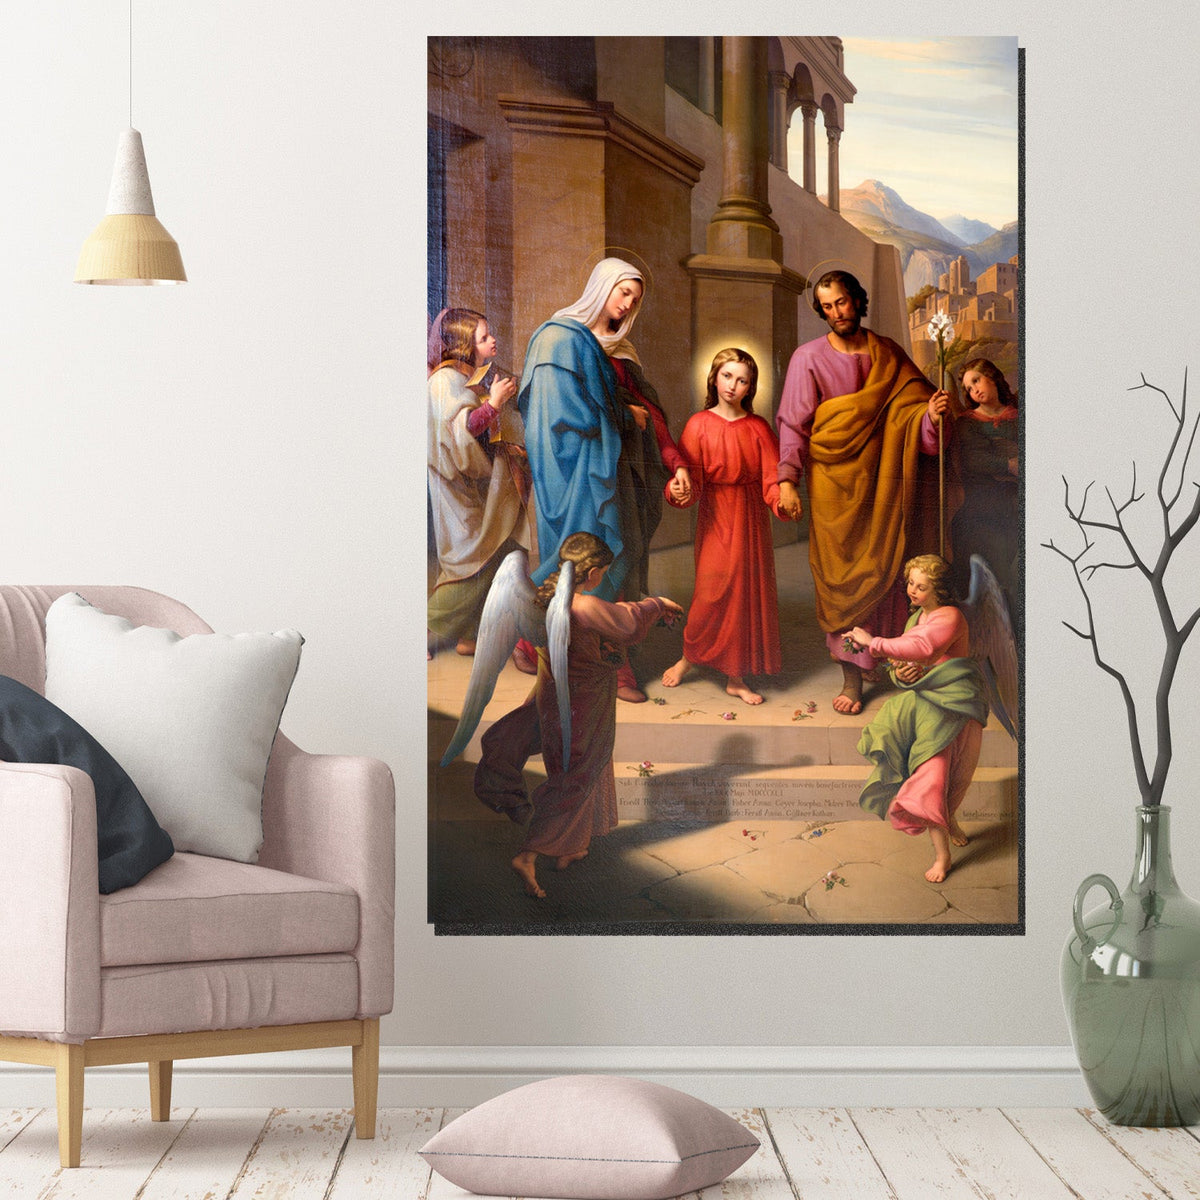 https://cdn.shopify.com/s/files/1/0387/9986/8044/products/TheHolyFamilyCanvasArtprintStretched-4.jpg